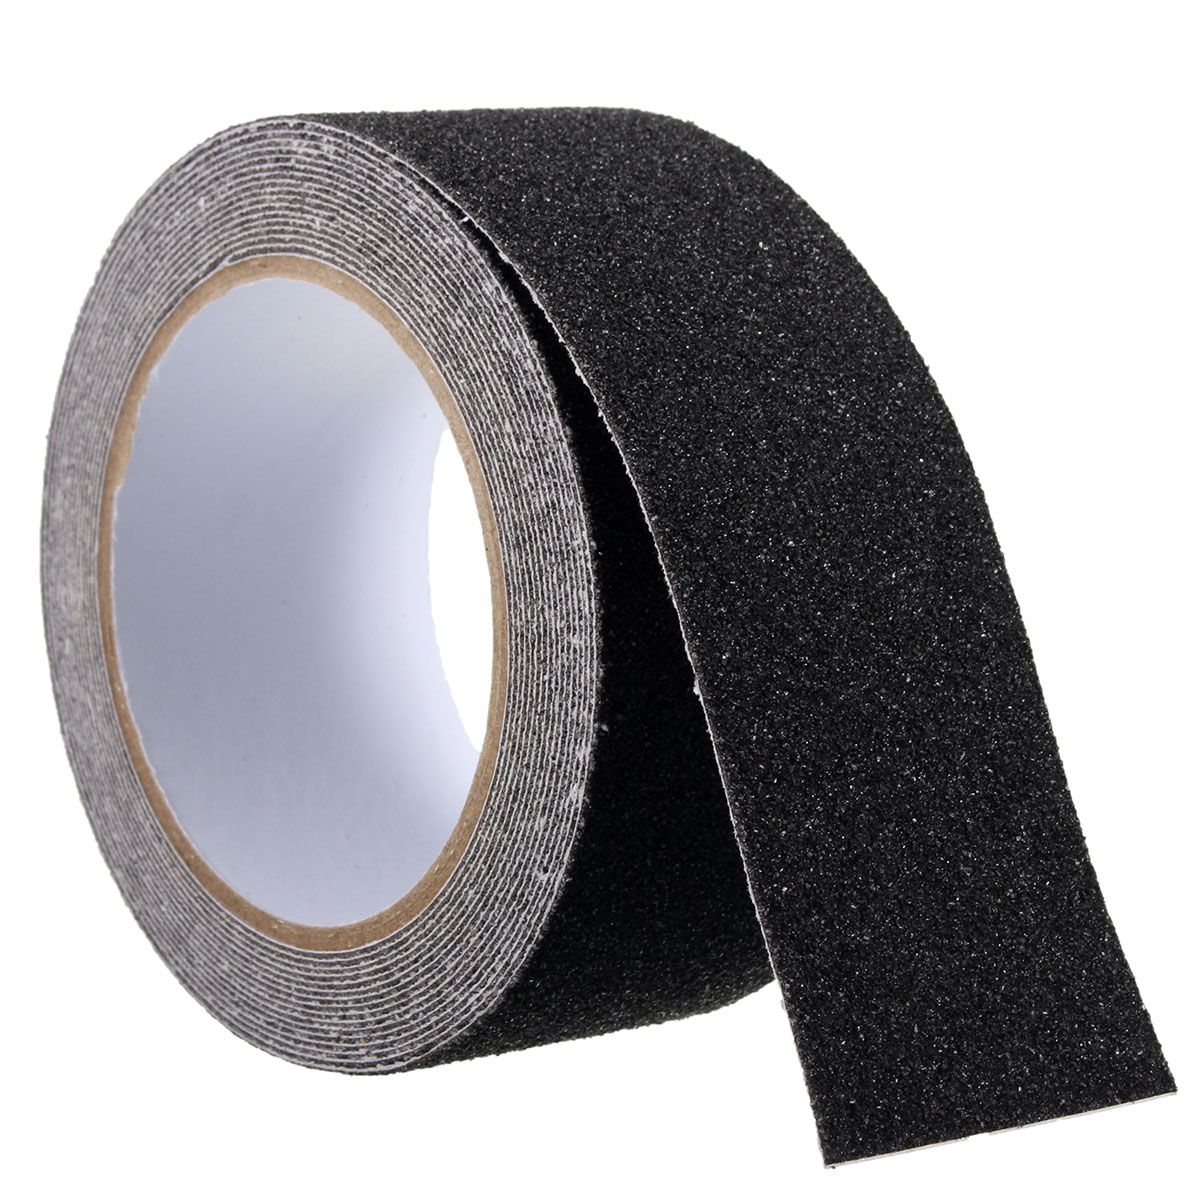 5CM-x-5M-Non-Slip-In-The-Dark-Tape-Anti-Slip-Adhesive-Grip-for-Stairs-and-Gaffers-165-Feet-Long-1382967